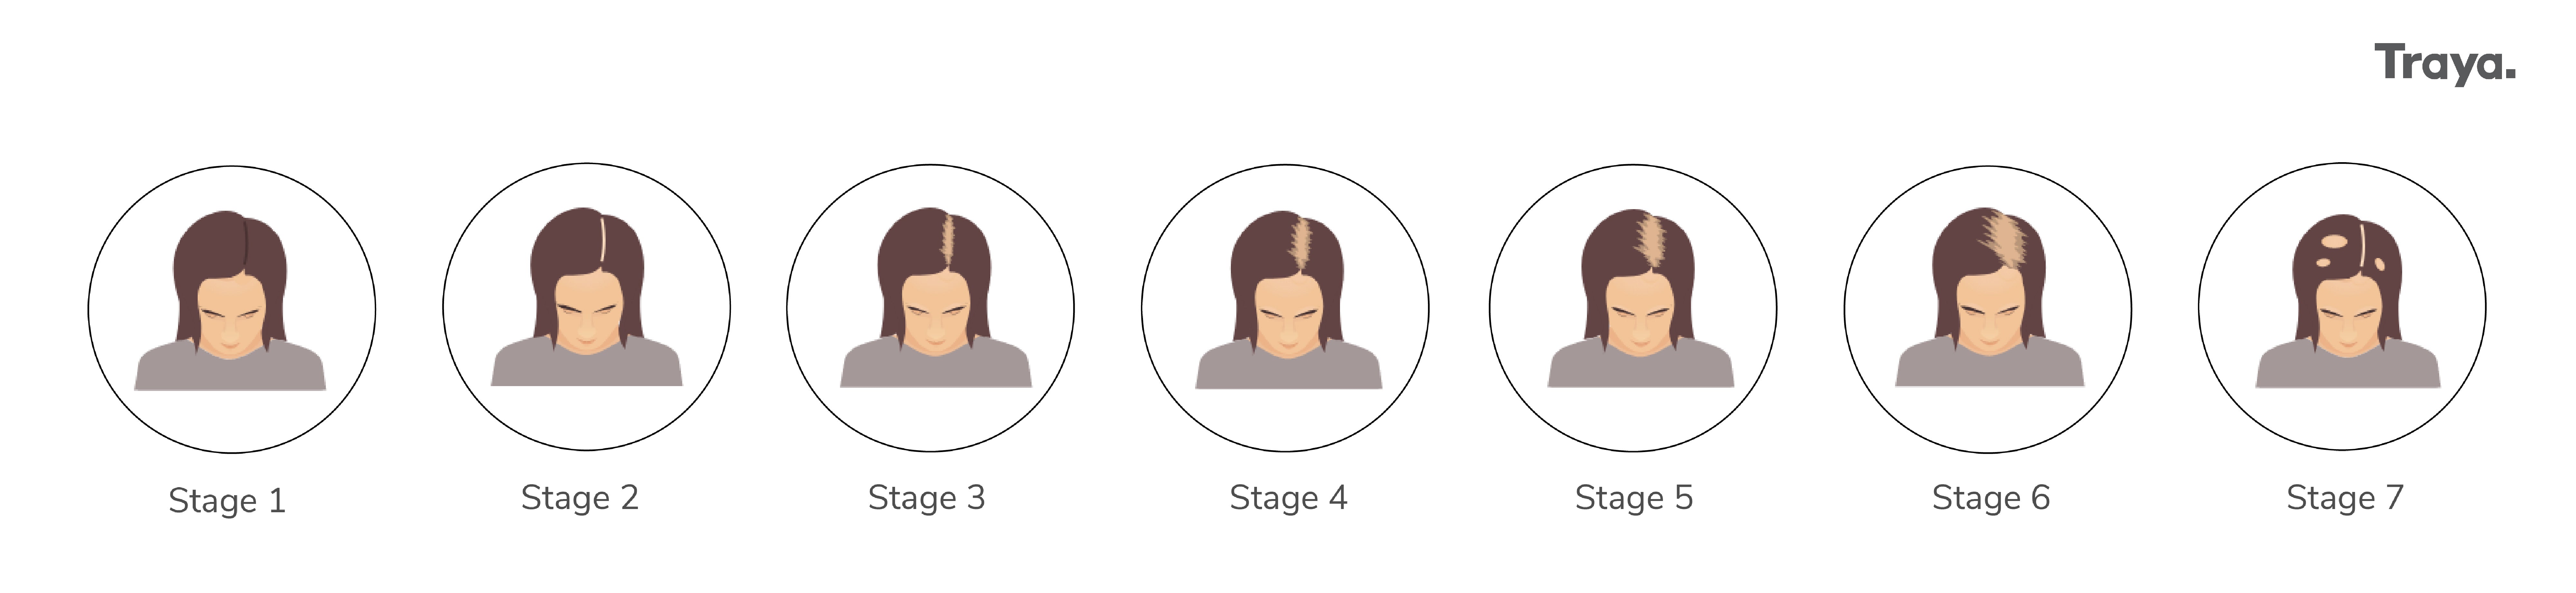 stages of hair fall in women